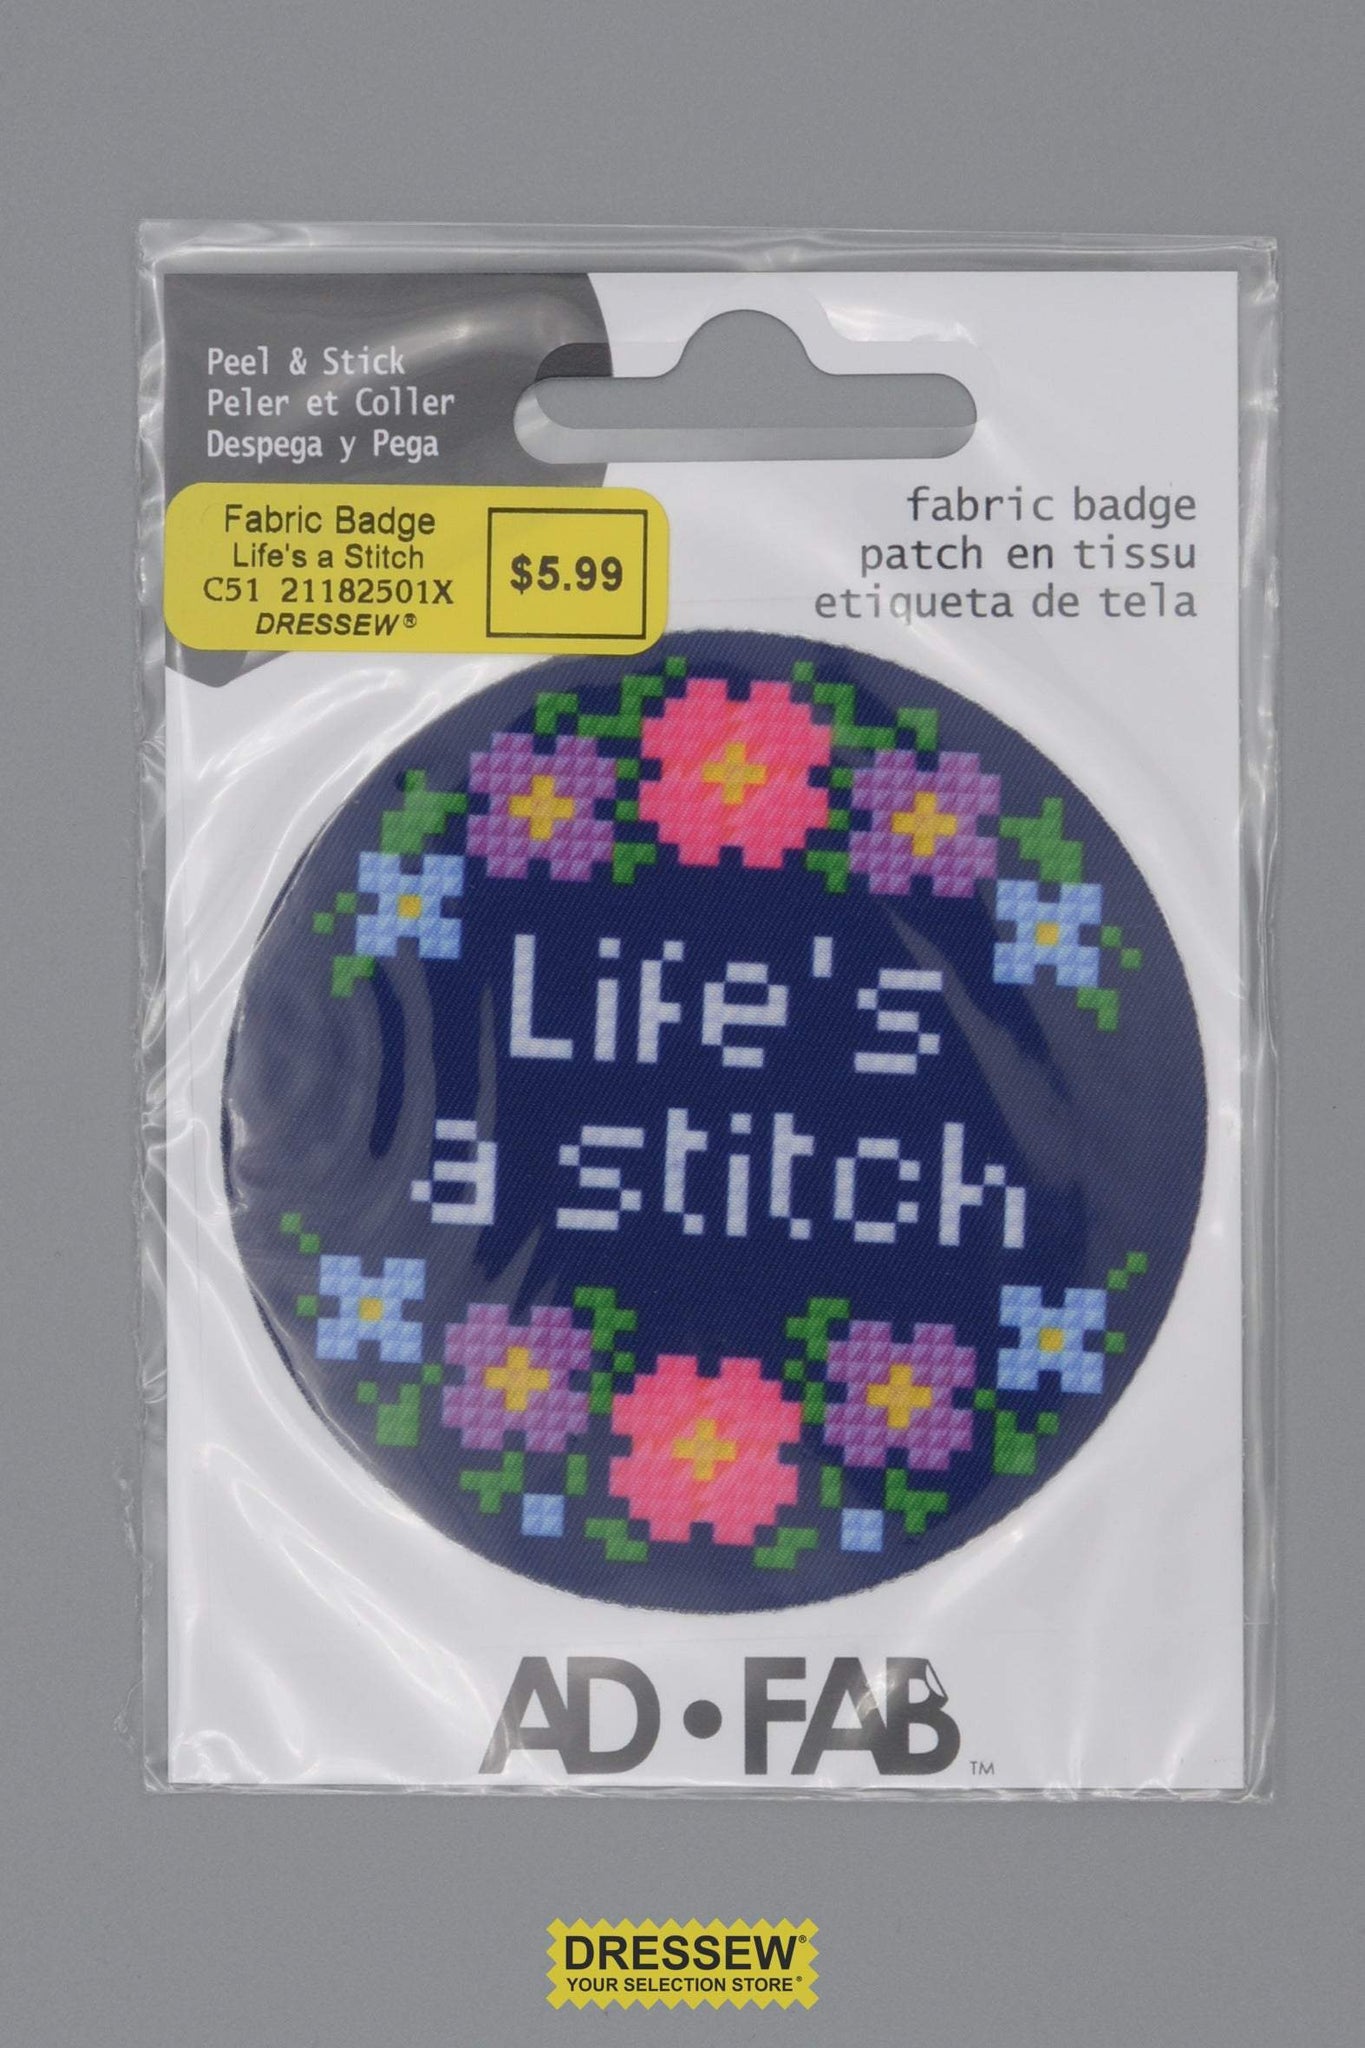 Sewer's Life Fabric Badge Life's a Stitch